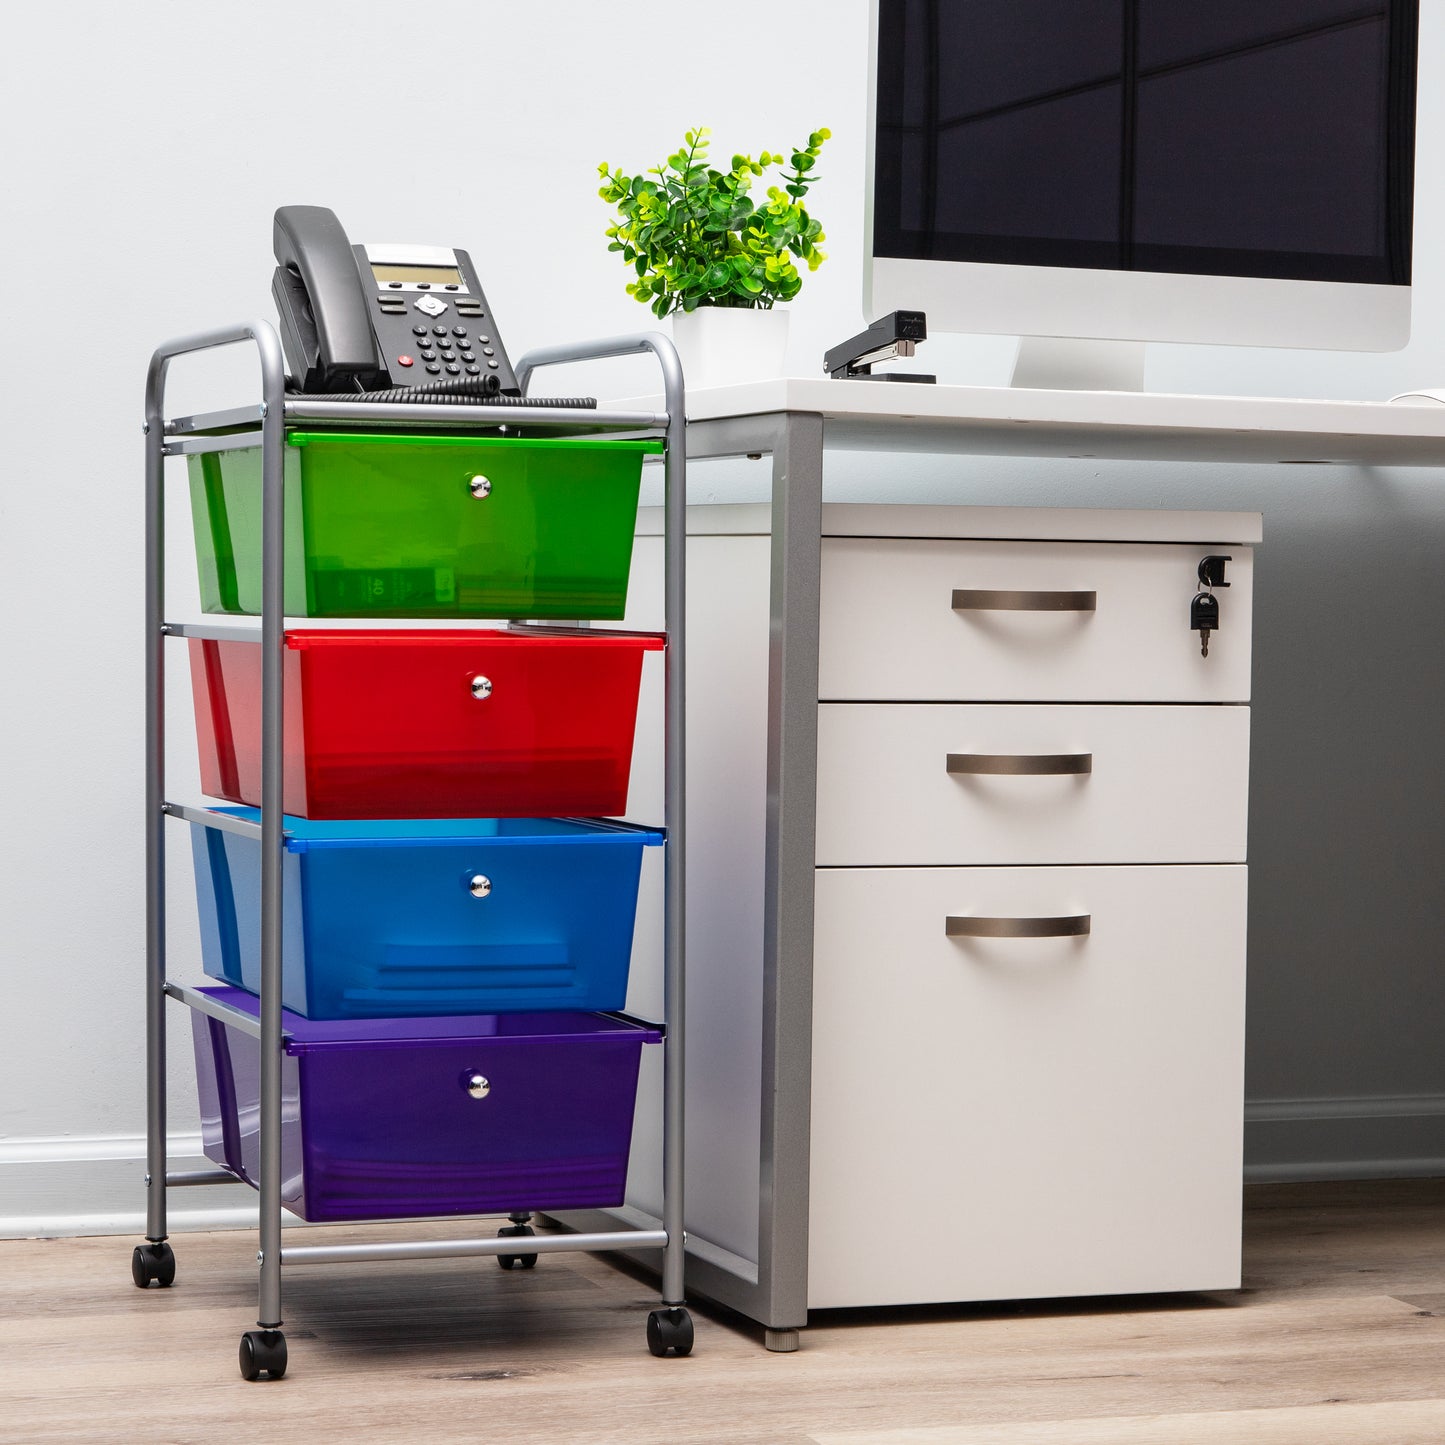 Mind Reader Rolling Cart with Drawers, Utility Cart, Craft Storage, Kitchen, Metal, 12.75"L x 15.25"W x 30"H, Multi-color